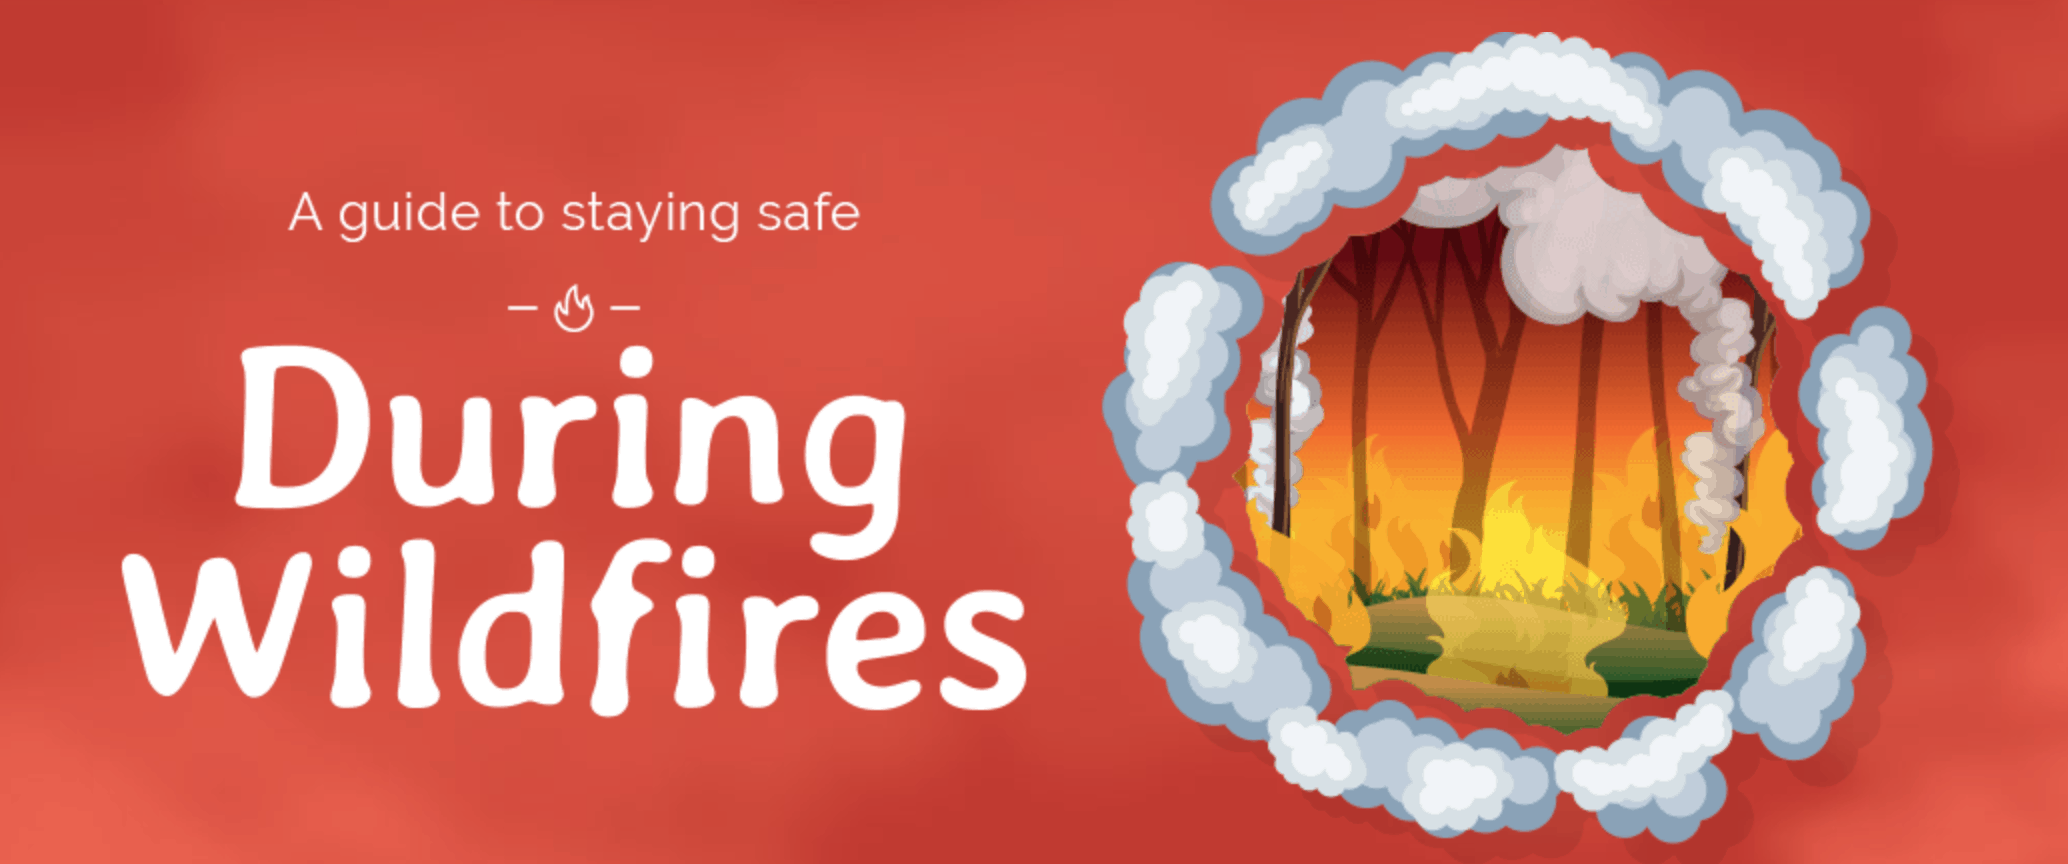 Guide To Staying Safe During Wildfires Featured Image